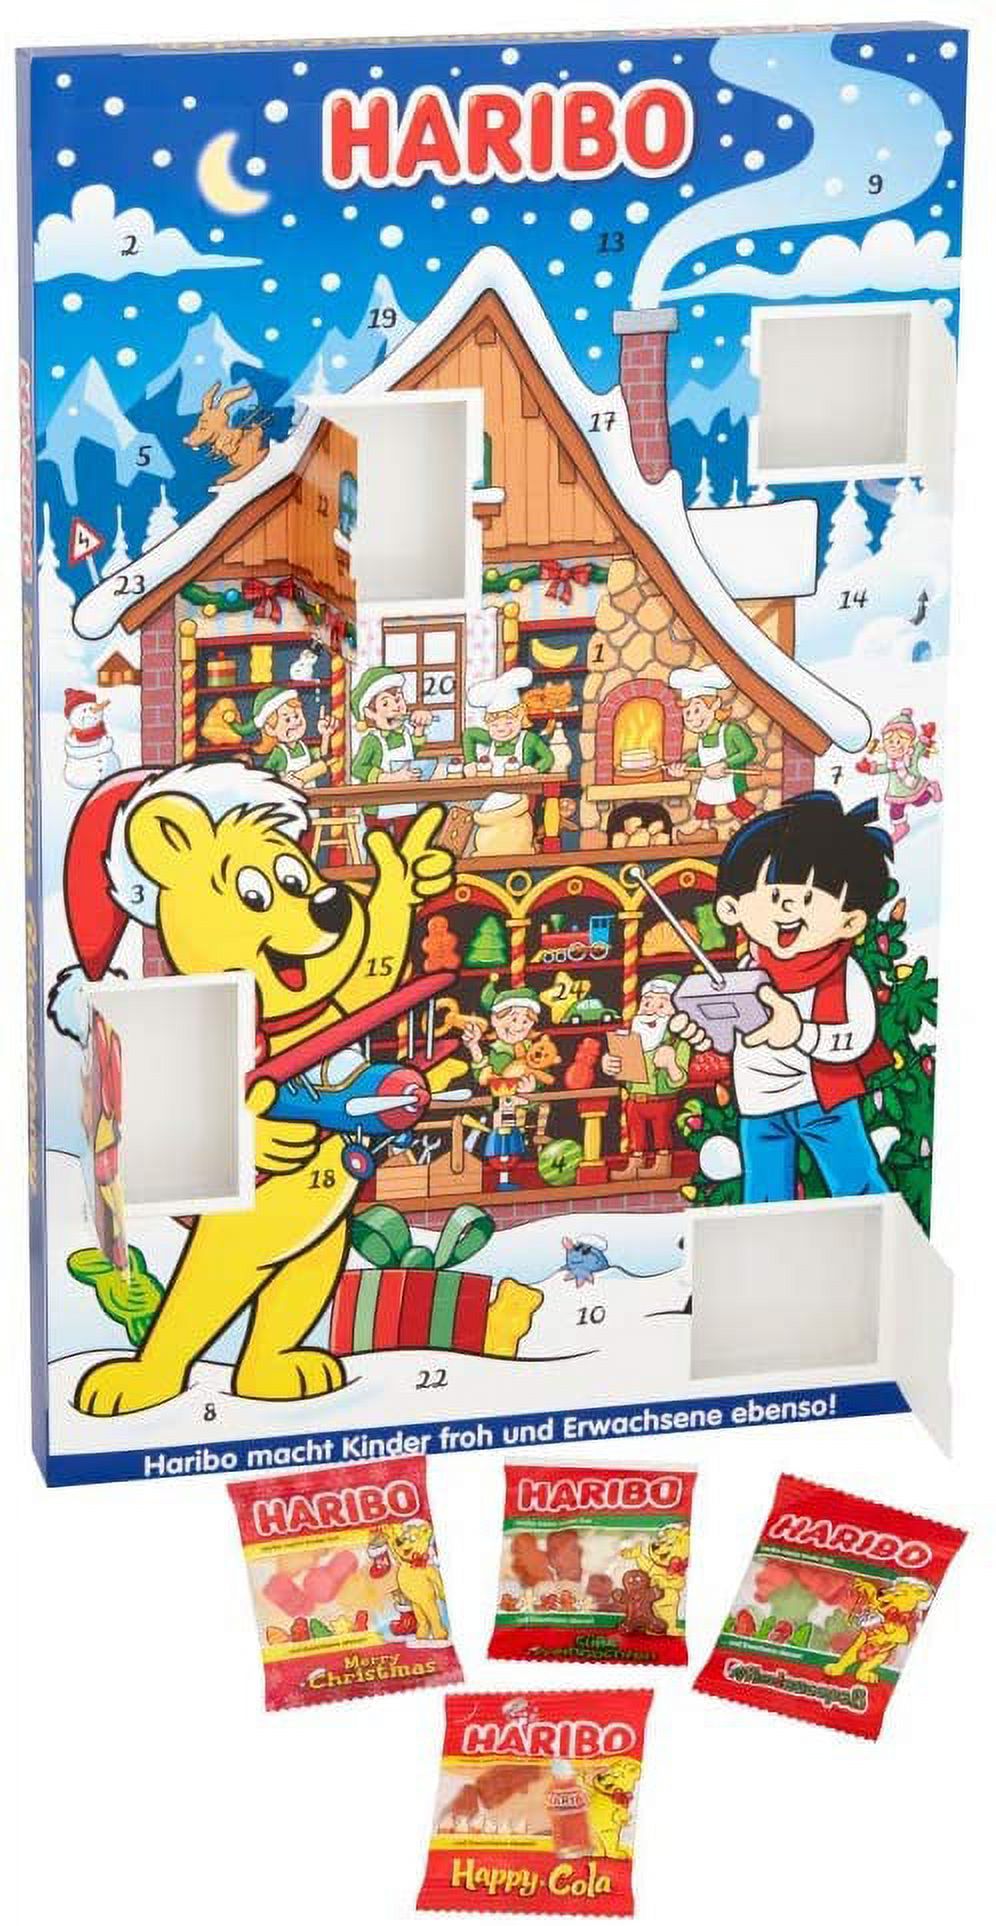 Advent Calendar (Haribo) Advent Calendar, Christmas sweets gift, 300g - UK Import - Christmas Countdown for Kids and Adults - 2-3 Days Delivery - image 4 of 5